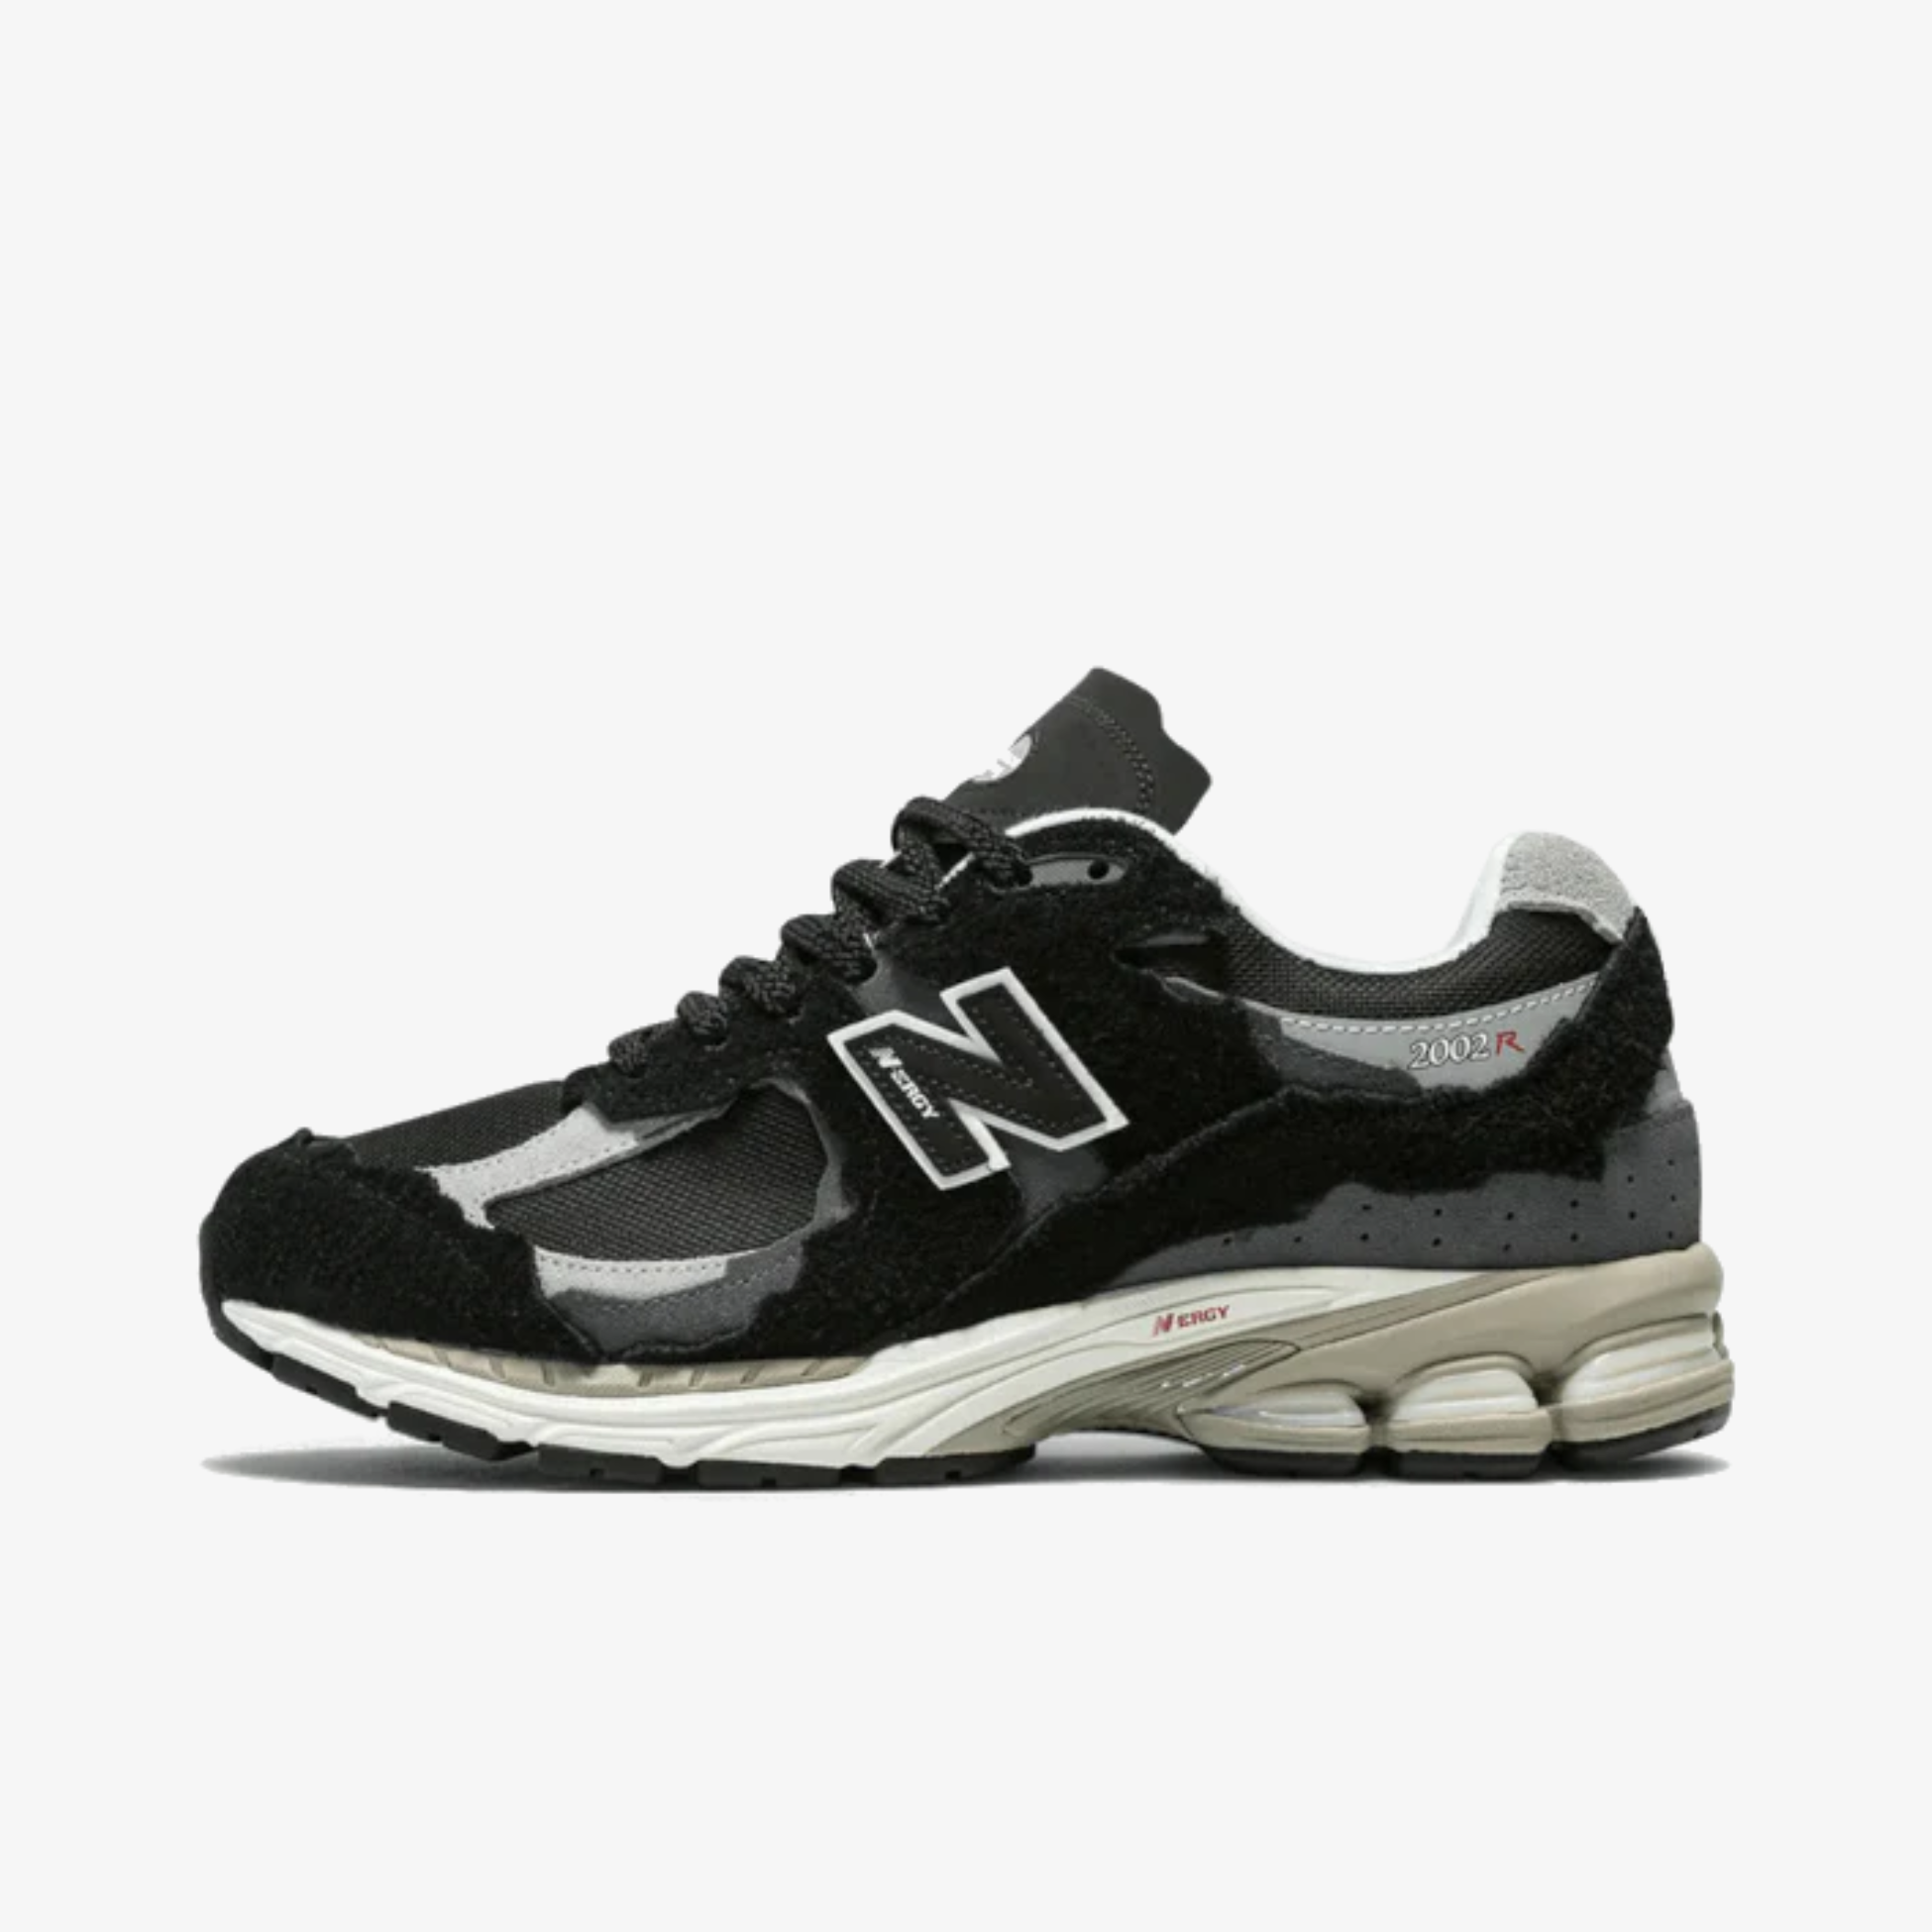 New Balance 2002R Protection Pack Nero